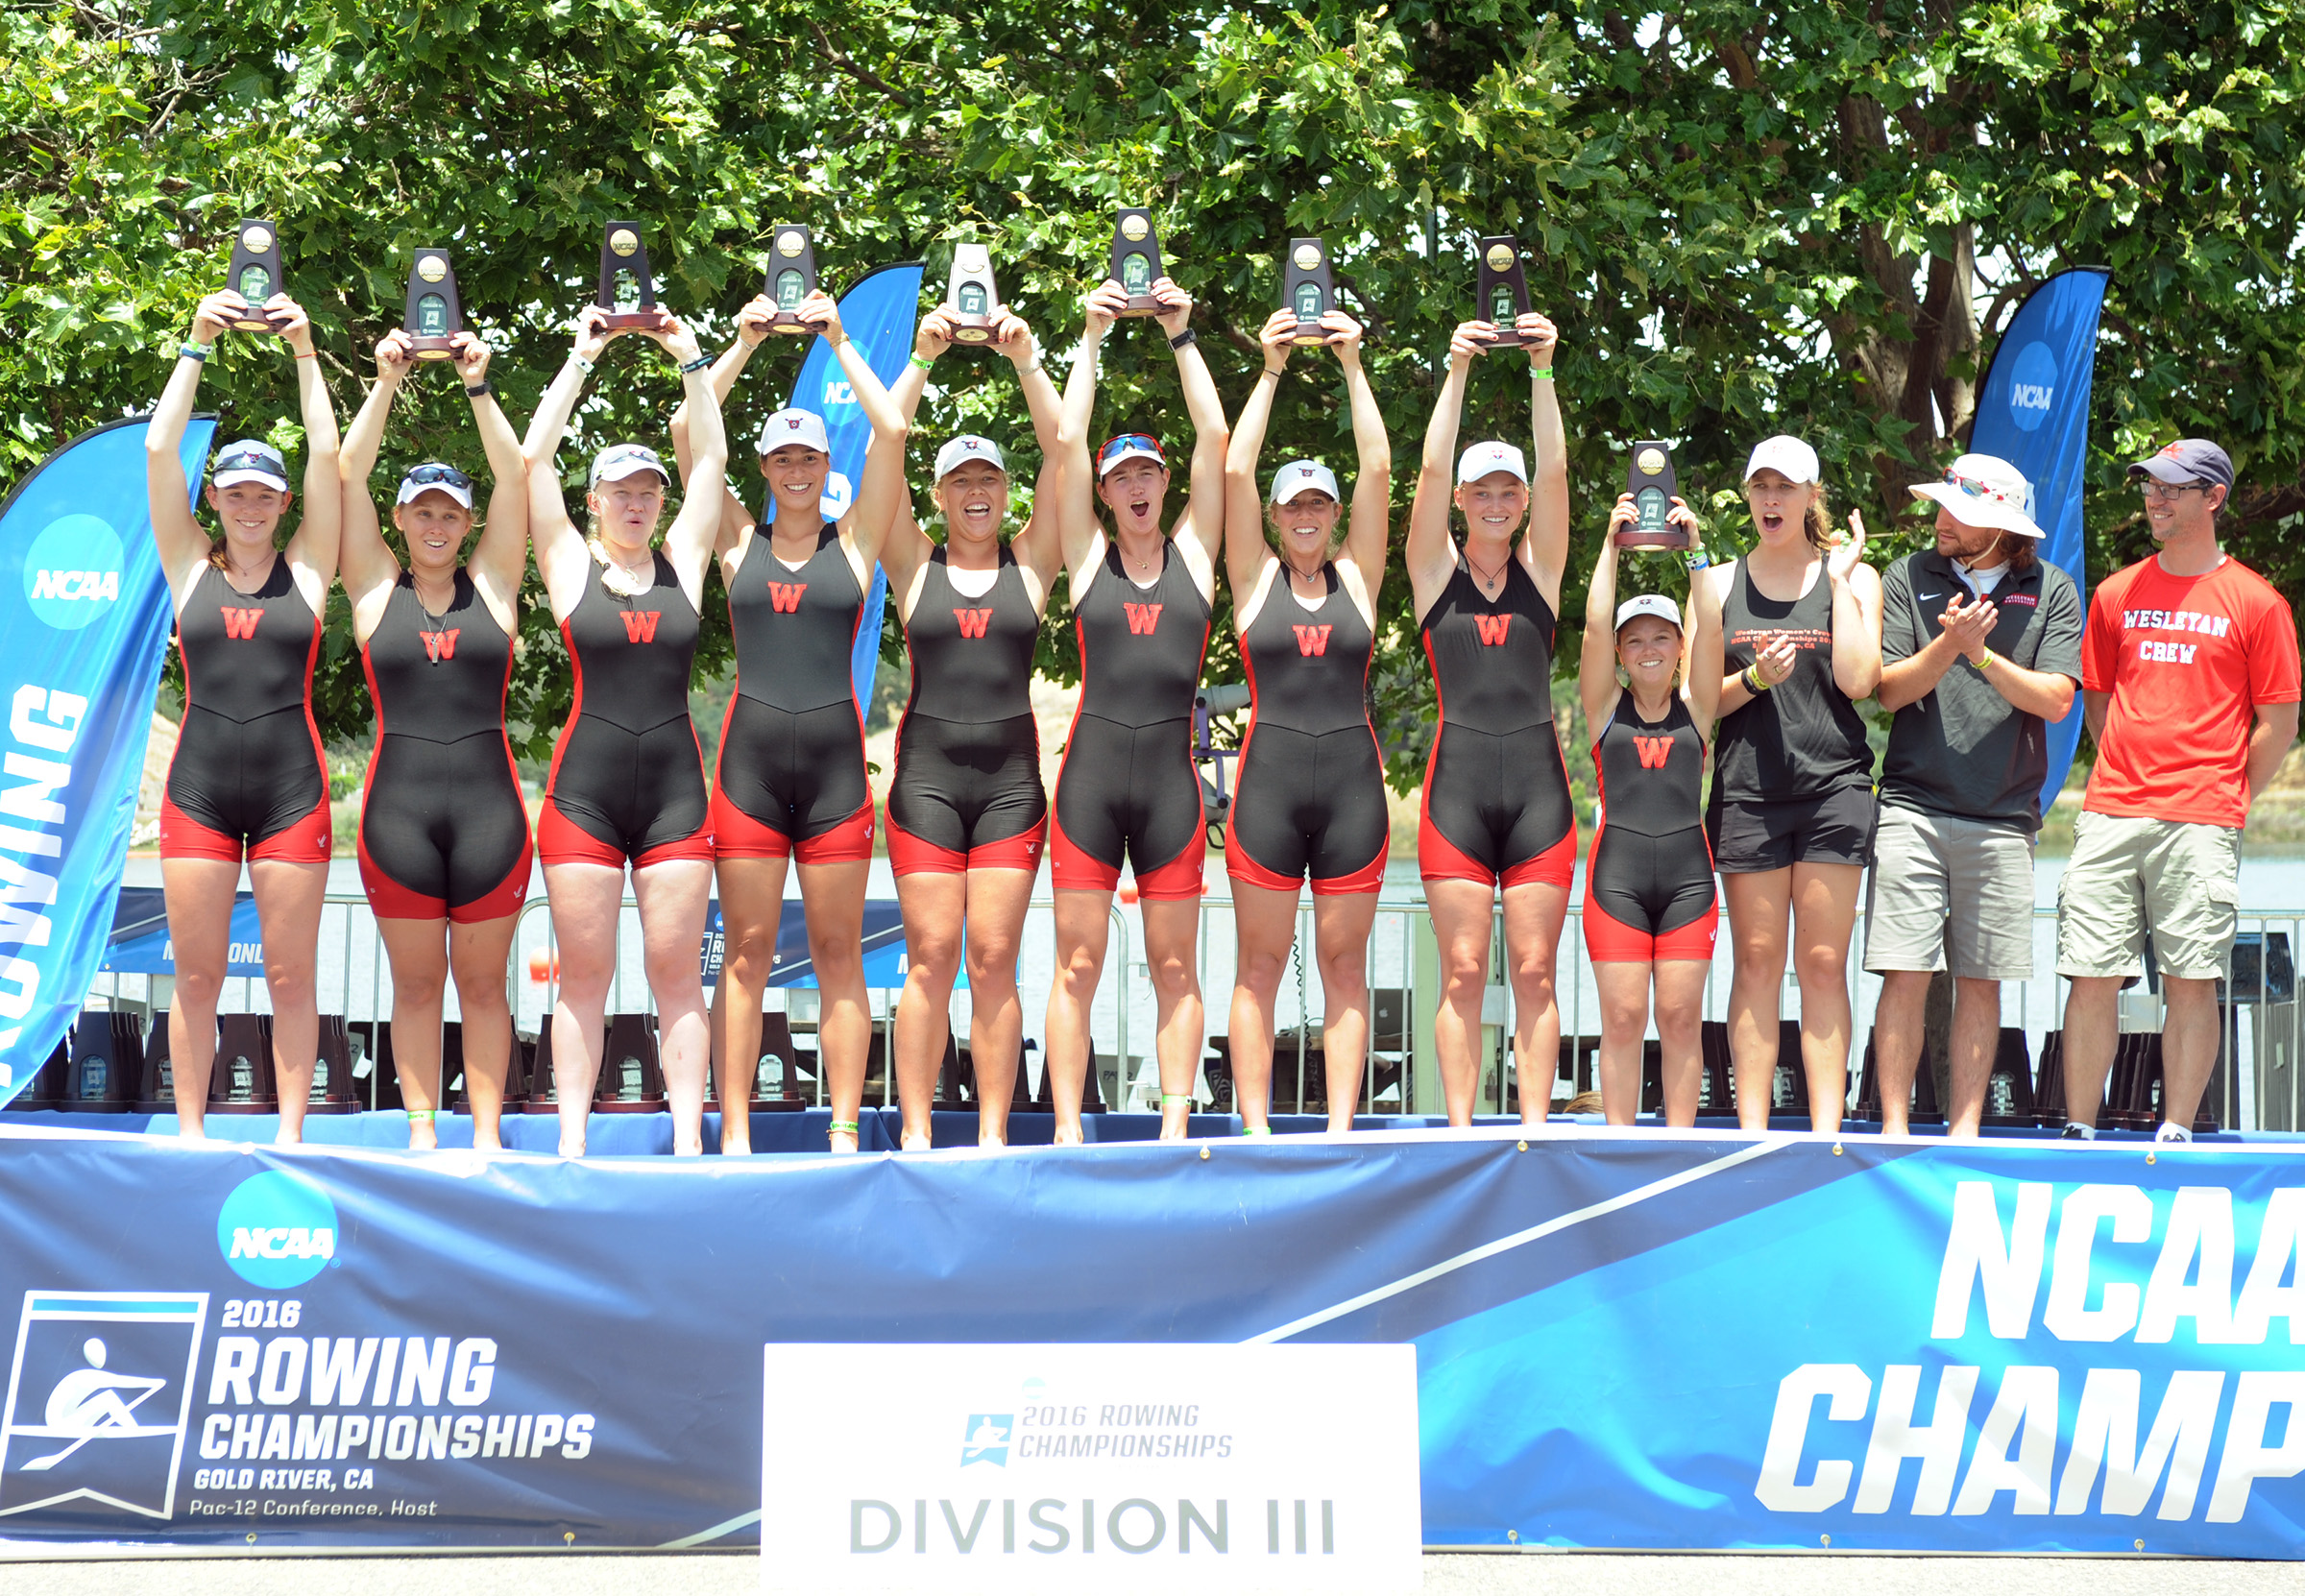 Women's Crew claimed bronze in the 2016 NCAA Division III Rowing Championships.